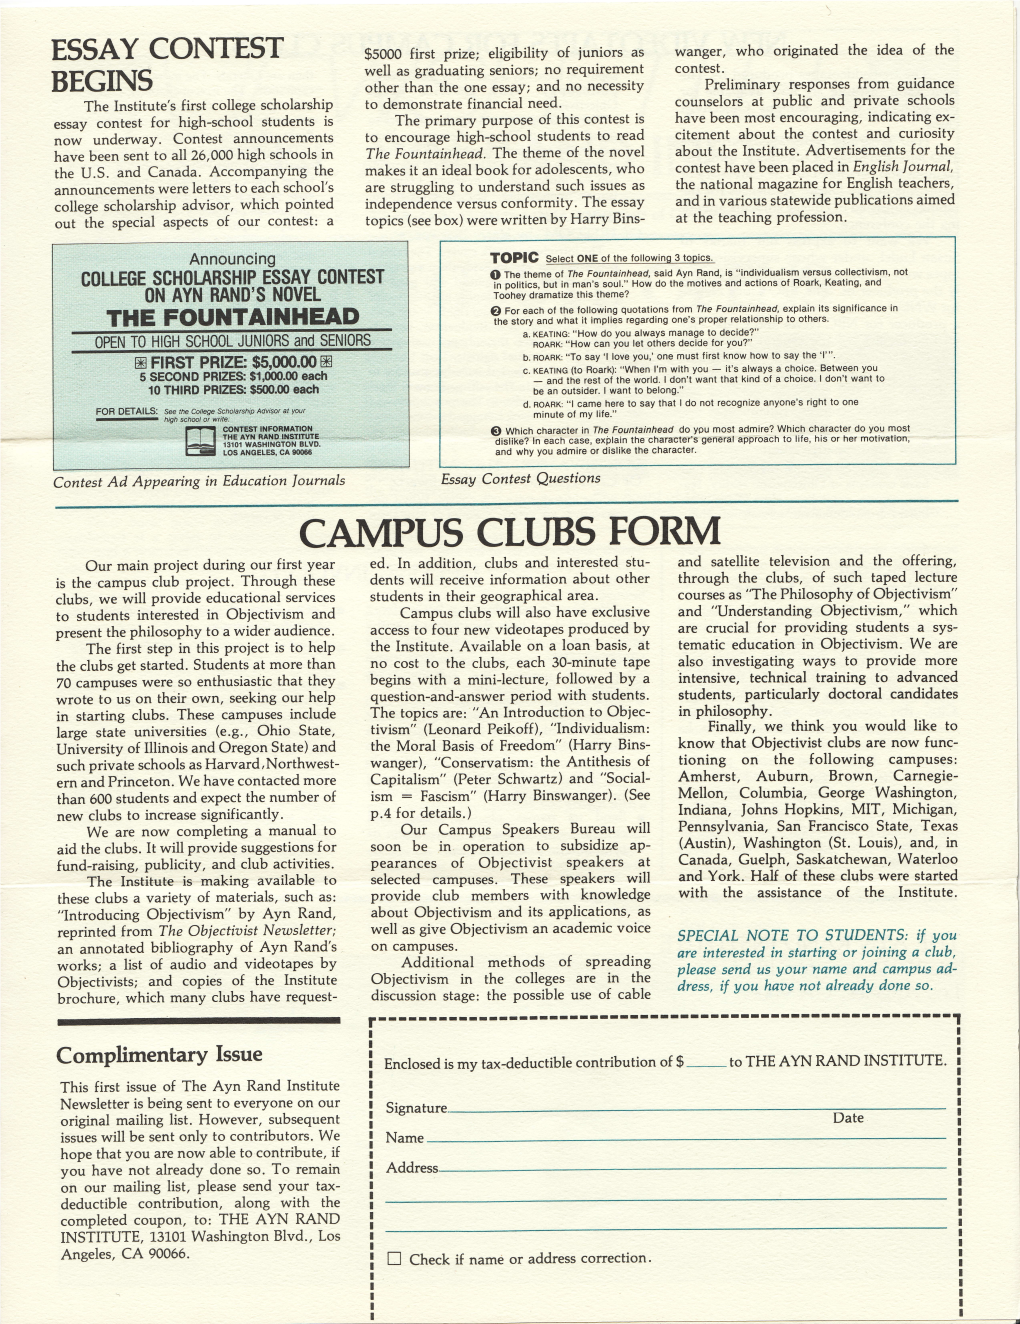 Caivipus Clubs Form